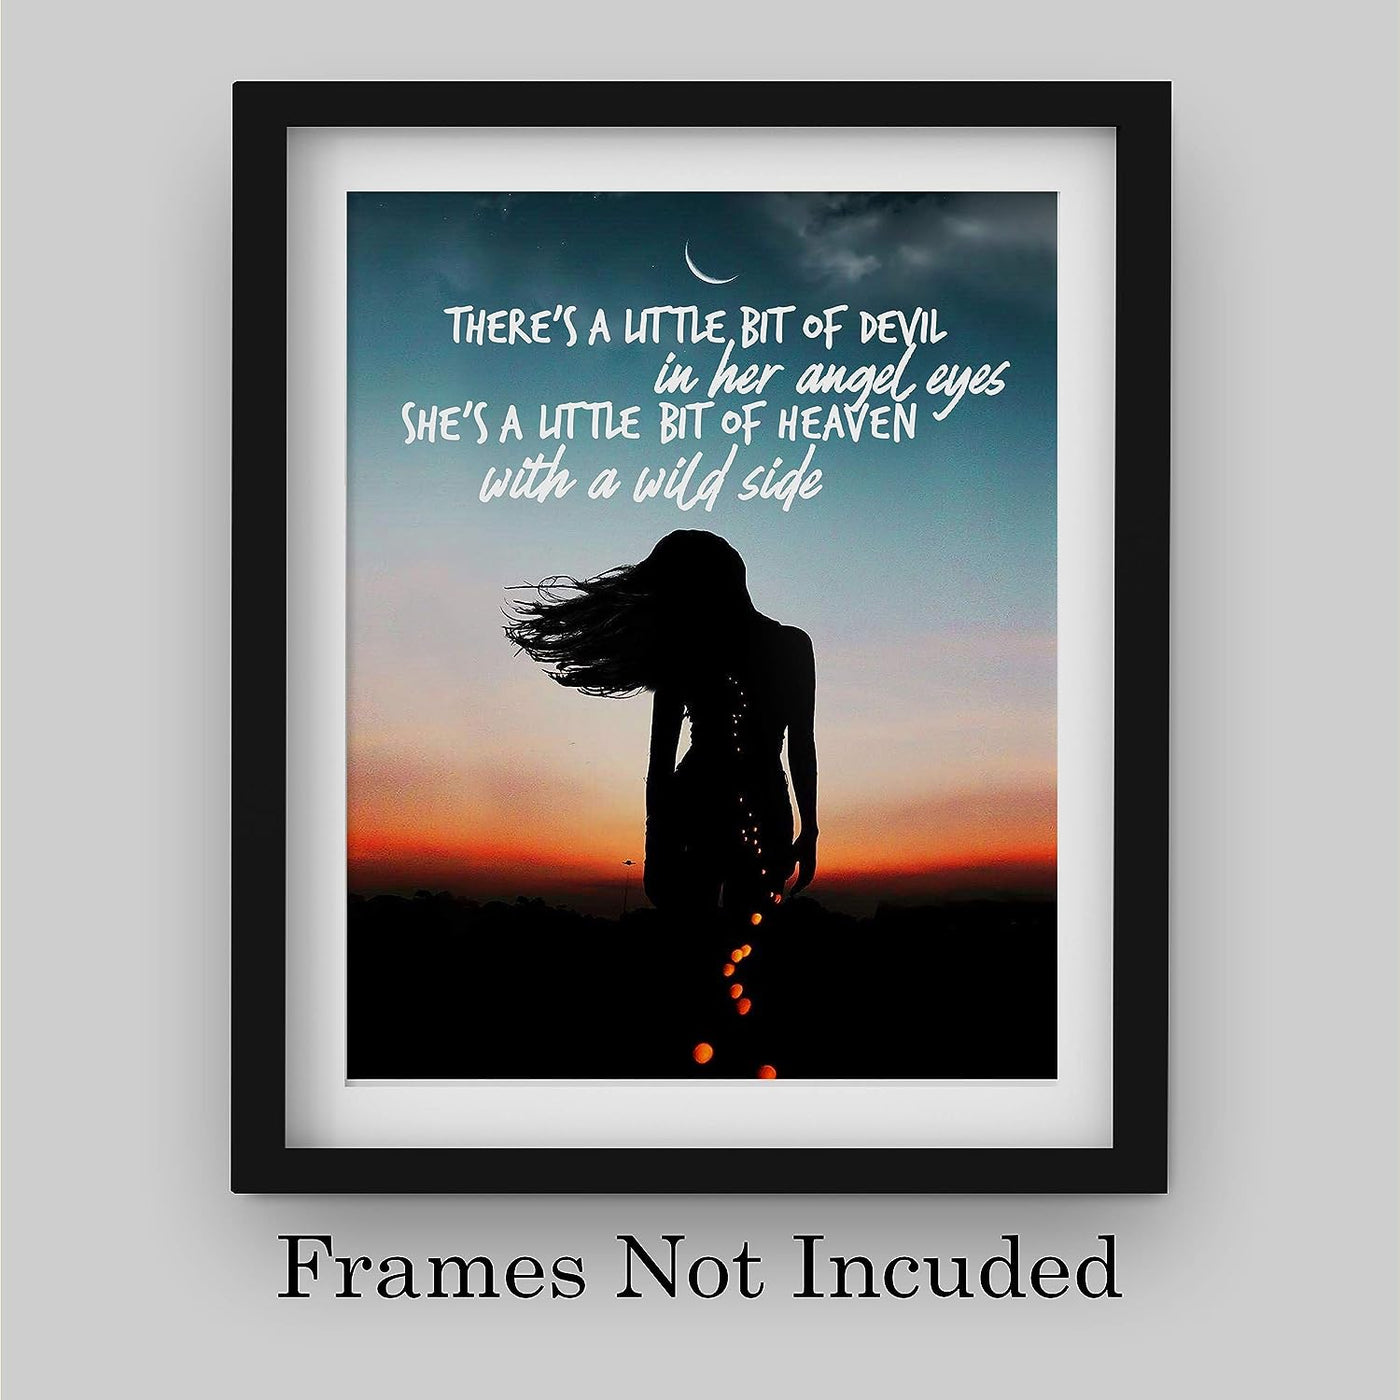 Love & Theft-"There's a Little Bit of Devil in Her Angel Eyes" Song Lyric Wall Art -8x10" Typographic Sunset Print -Ready to Frame. Home-Studio-Bar-Dorm-Cave Decor. Great Gift for Country Music Fans!